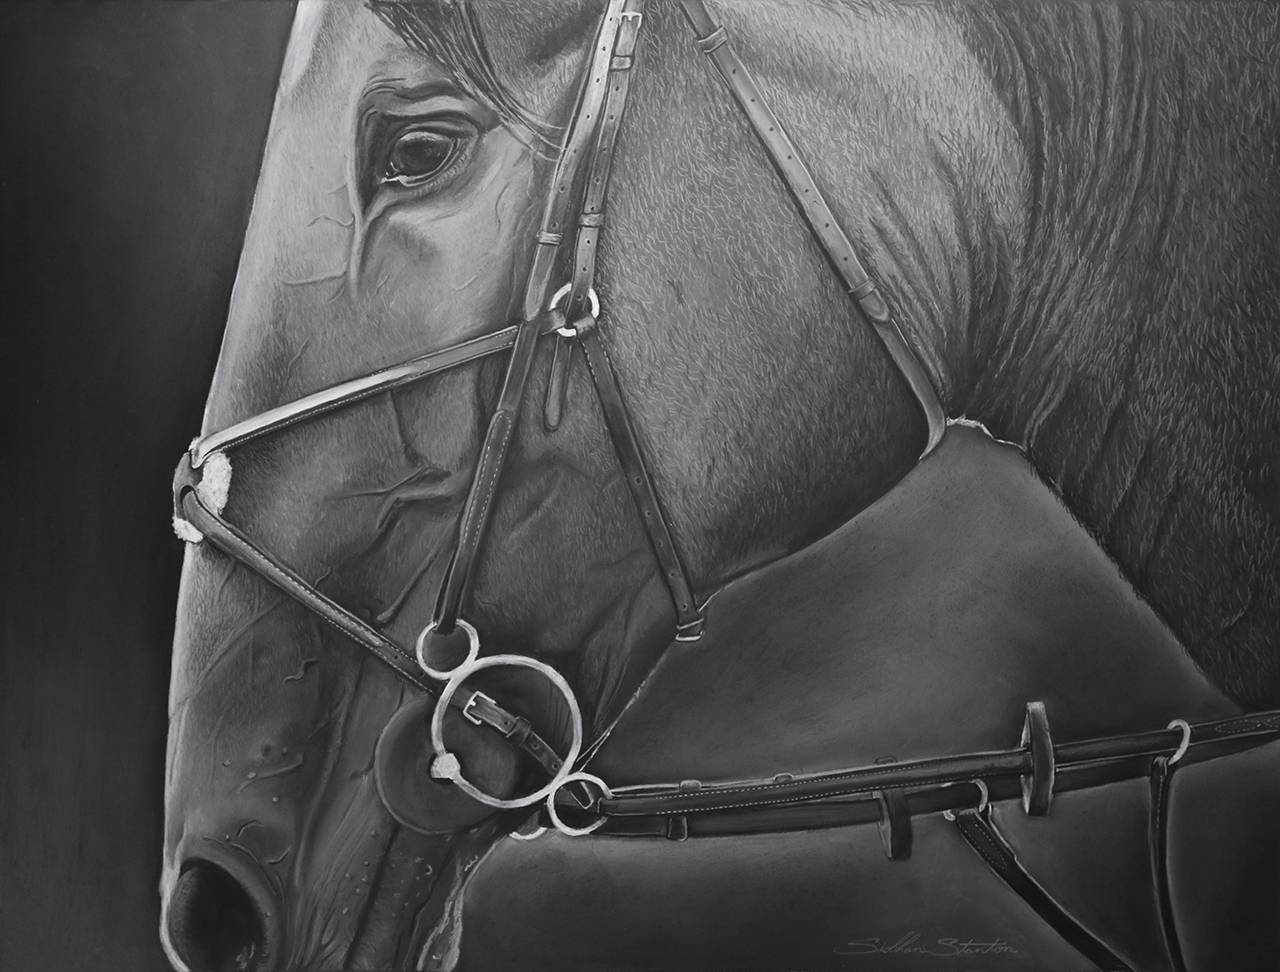  Siobhan Stanton - Charcoal Drawing, Hastings-on-Hudson, NY 